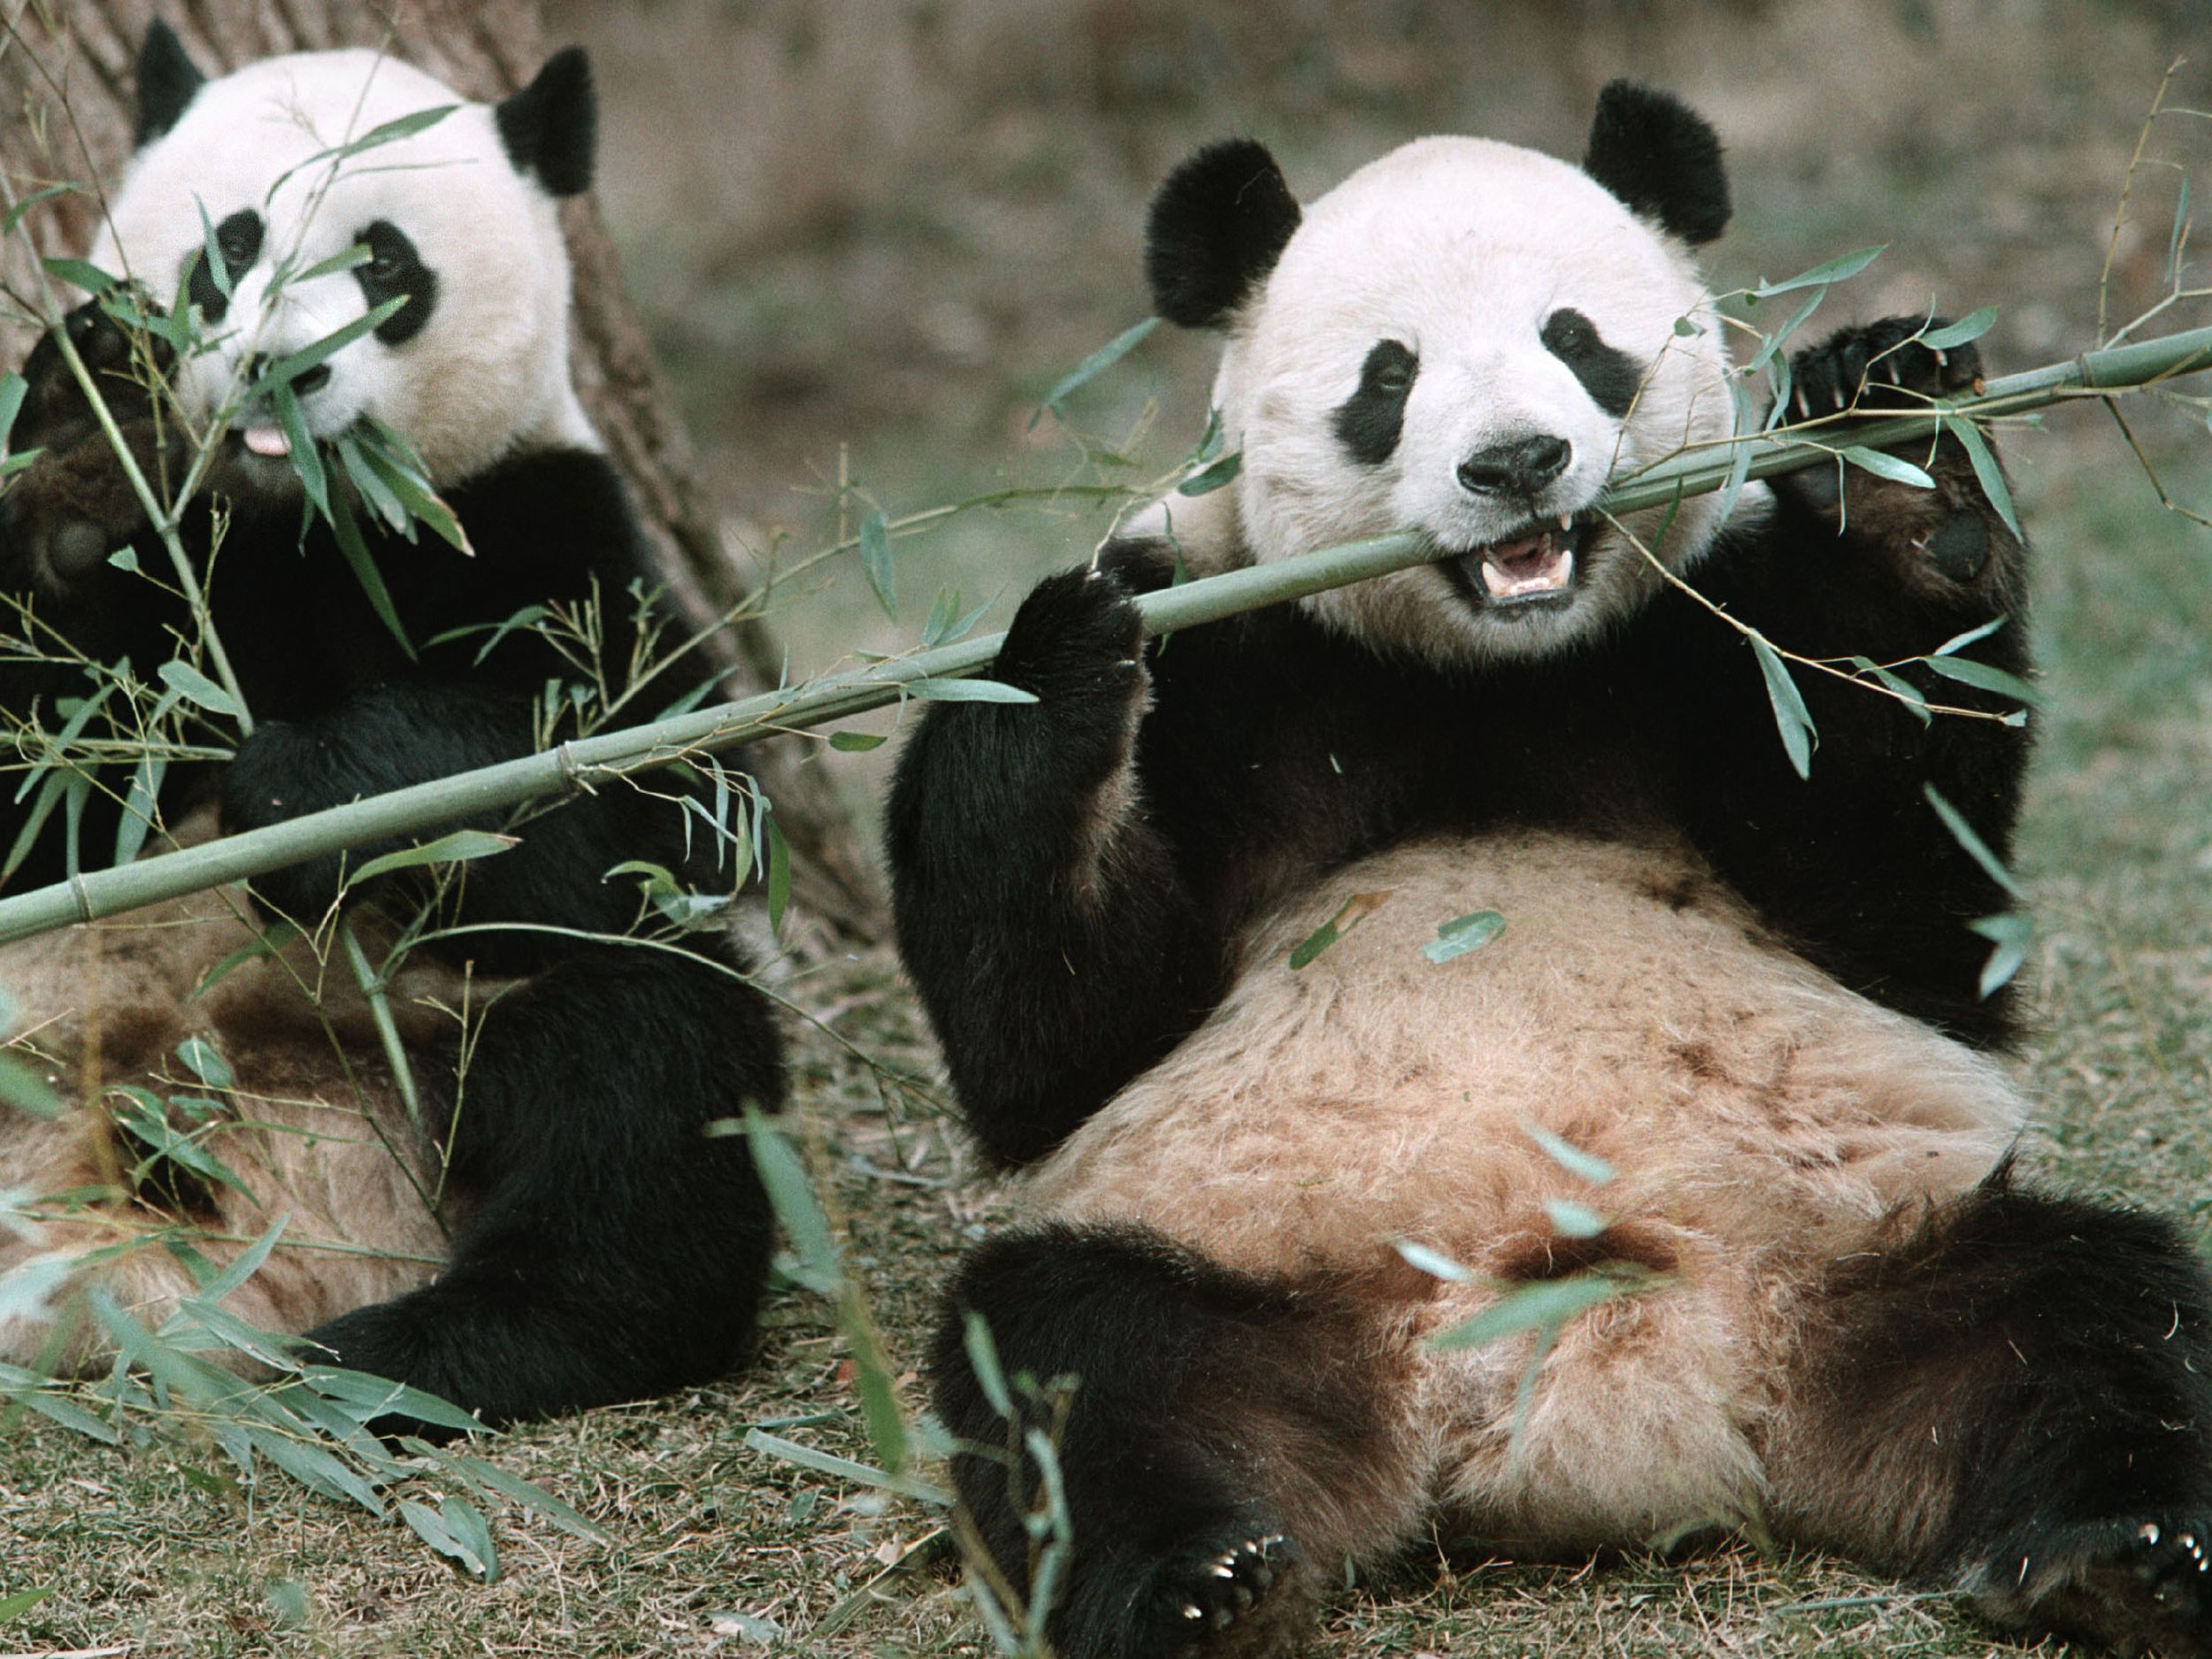 Giant pandas have been stars of the National Zoo for 50 years | The  Spokesman-Review